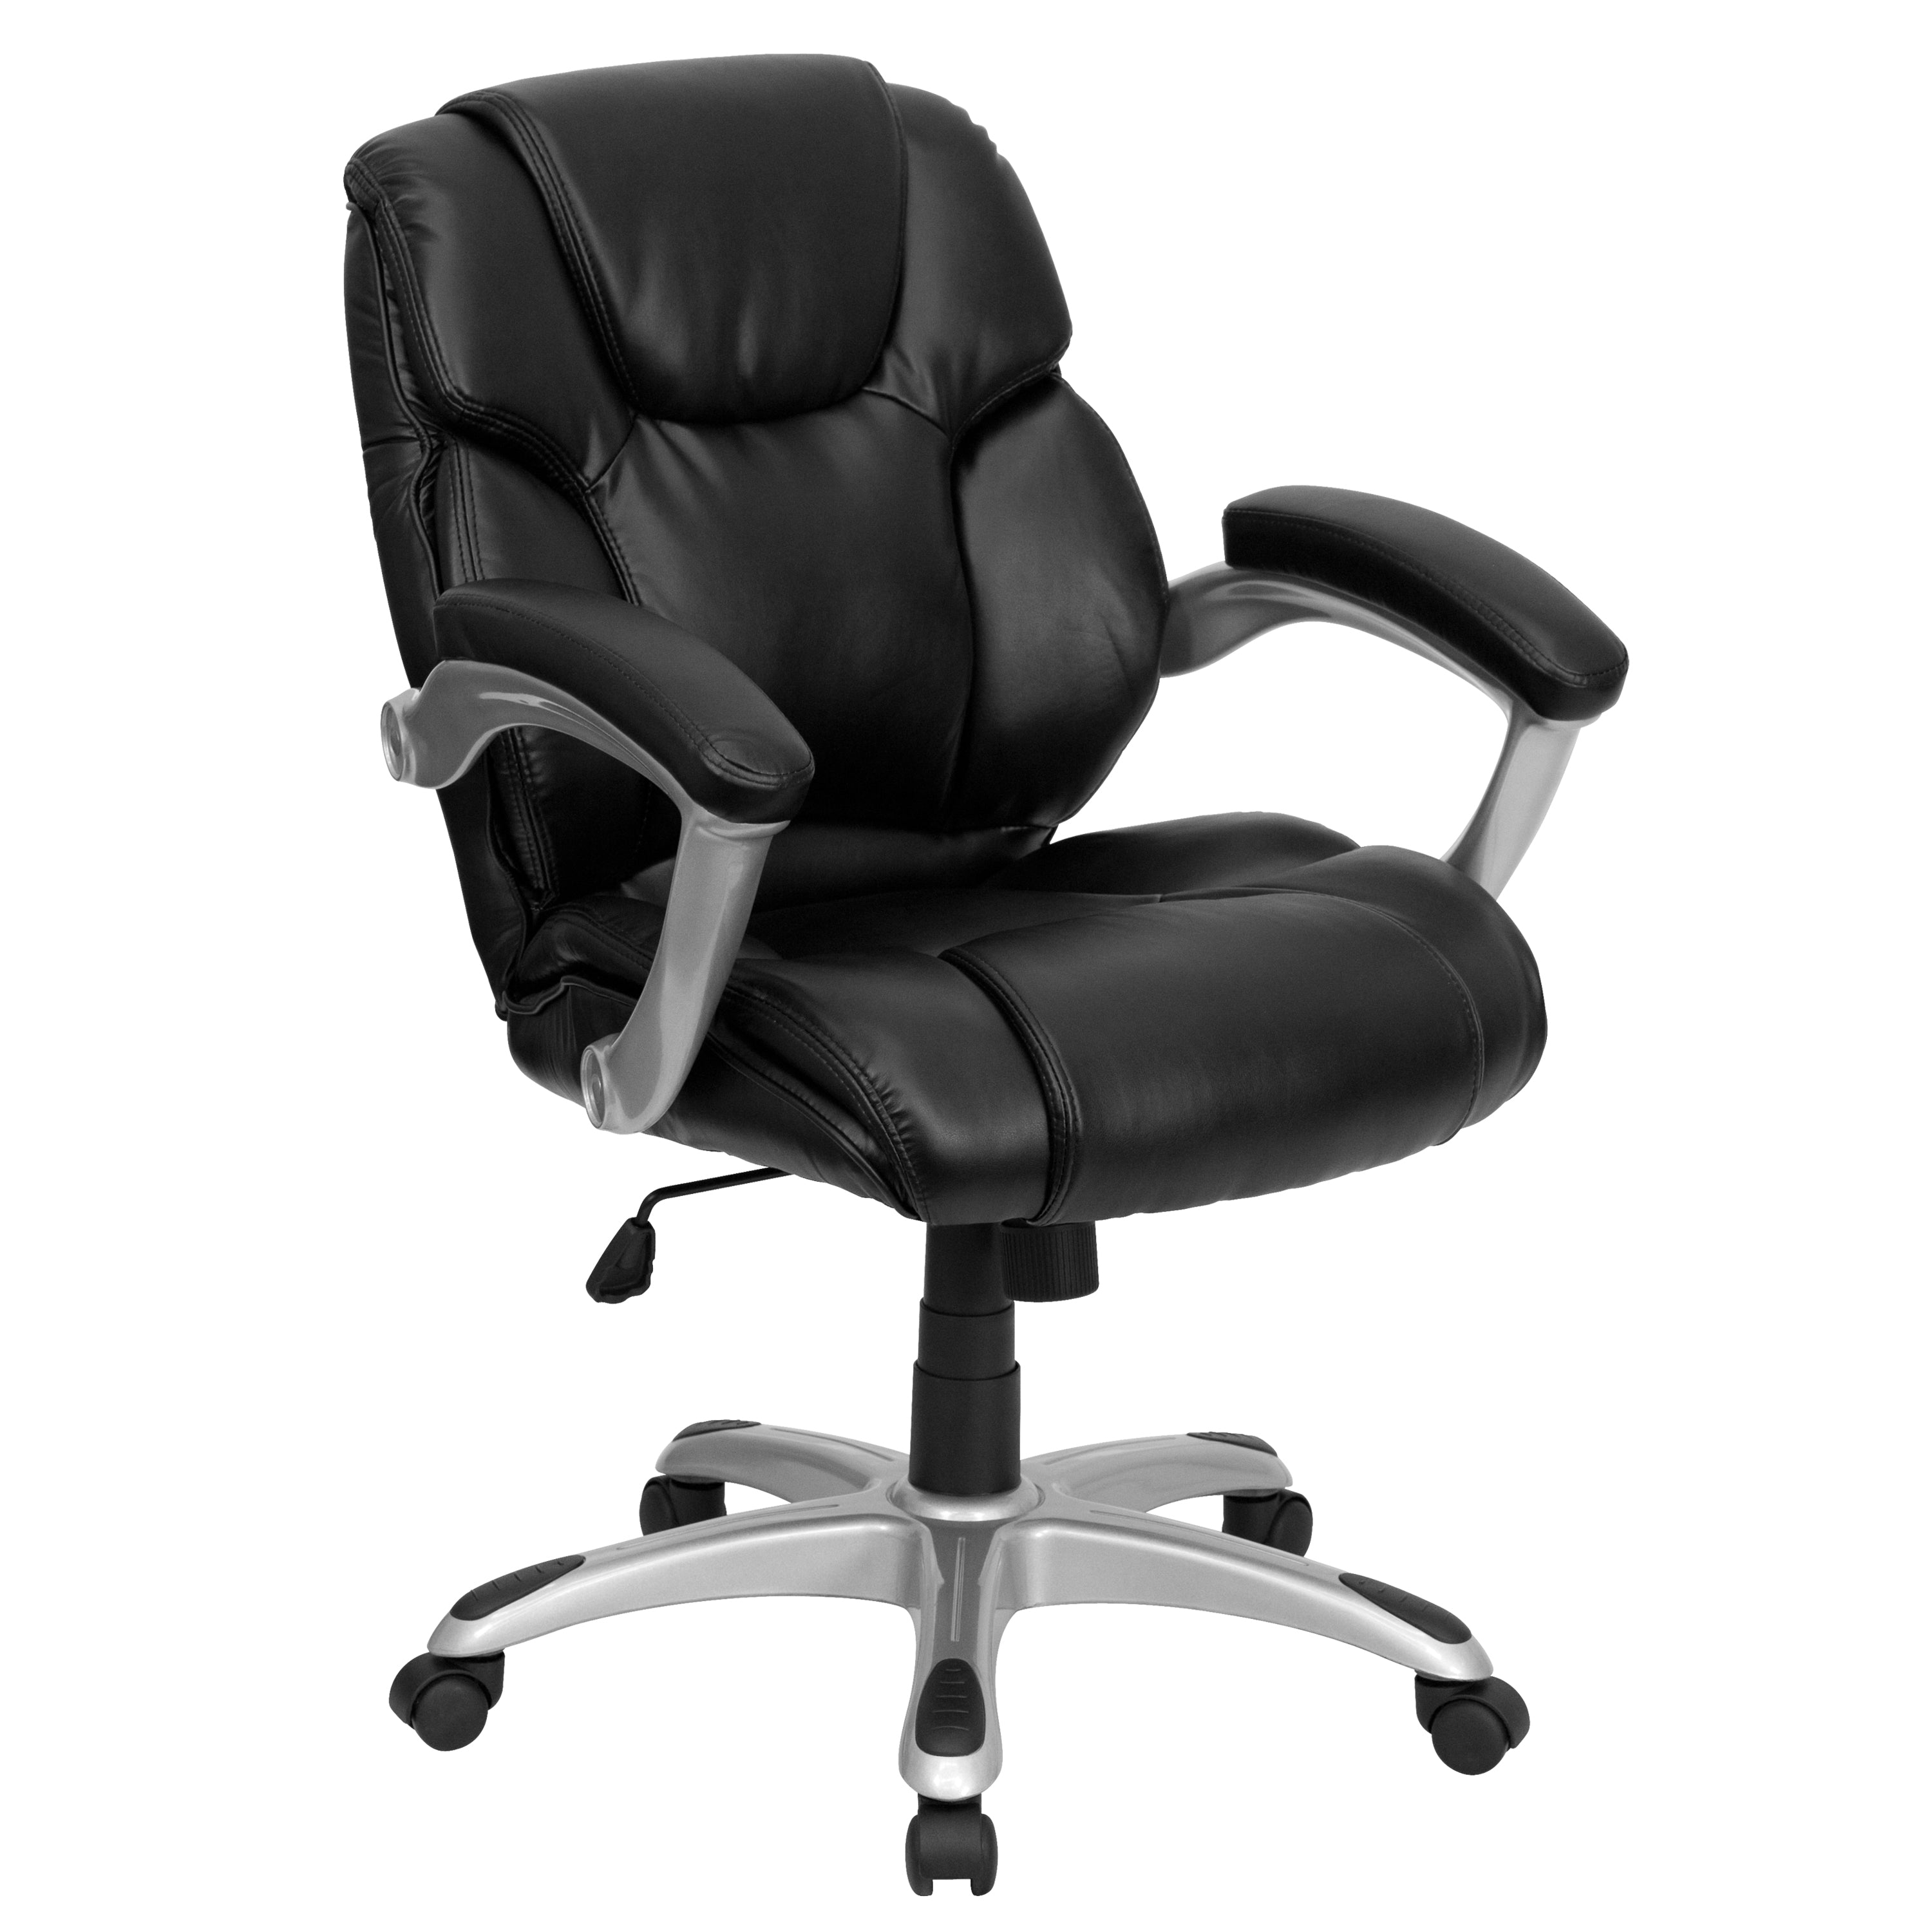 Mid-Back LeatherSoft Layered Upholstered Executive Swivel Ergonomic Office Chair with Silver Nylon Base and Arms-Office Chair-Flash Furniture-Wall2Wall Furnishings